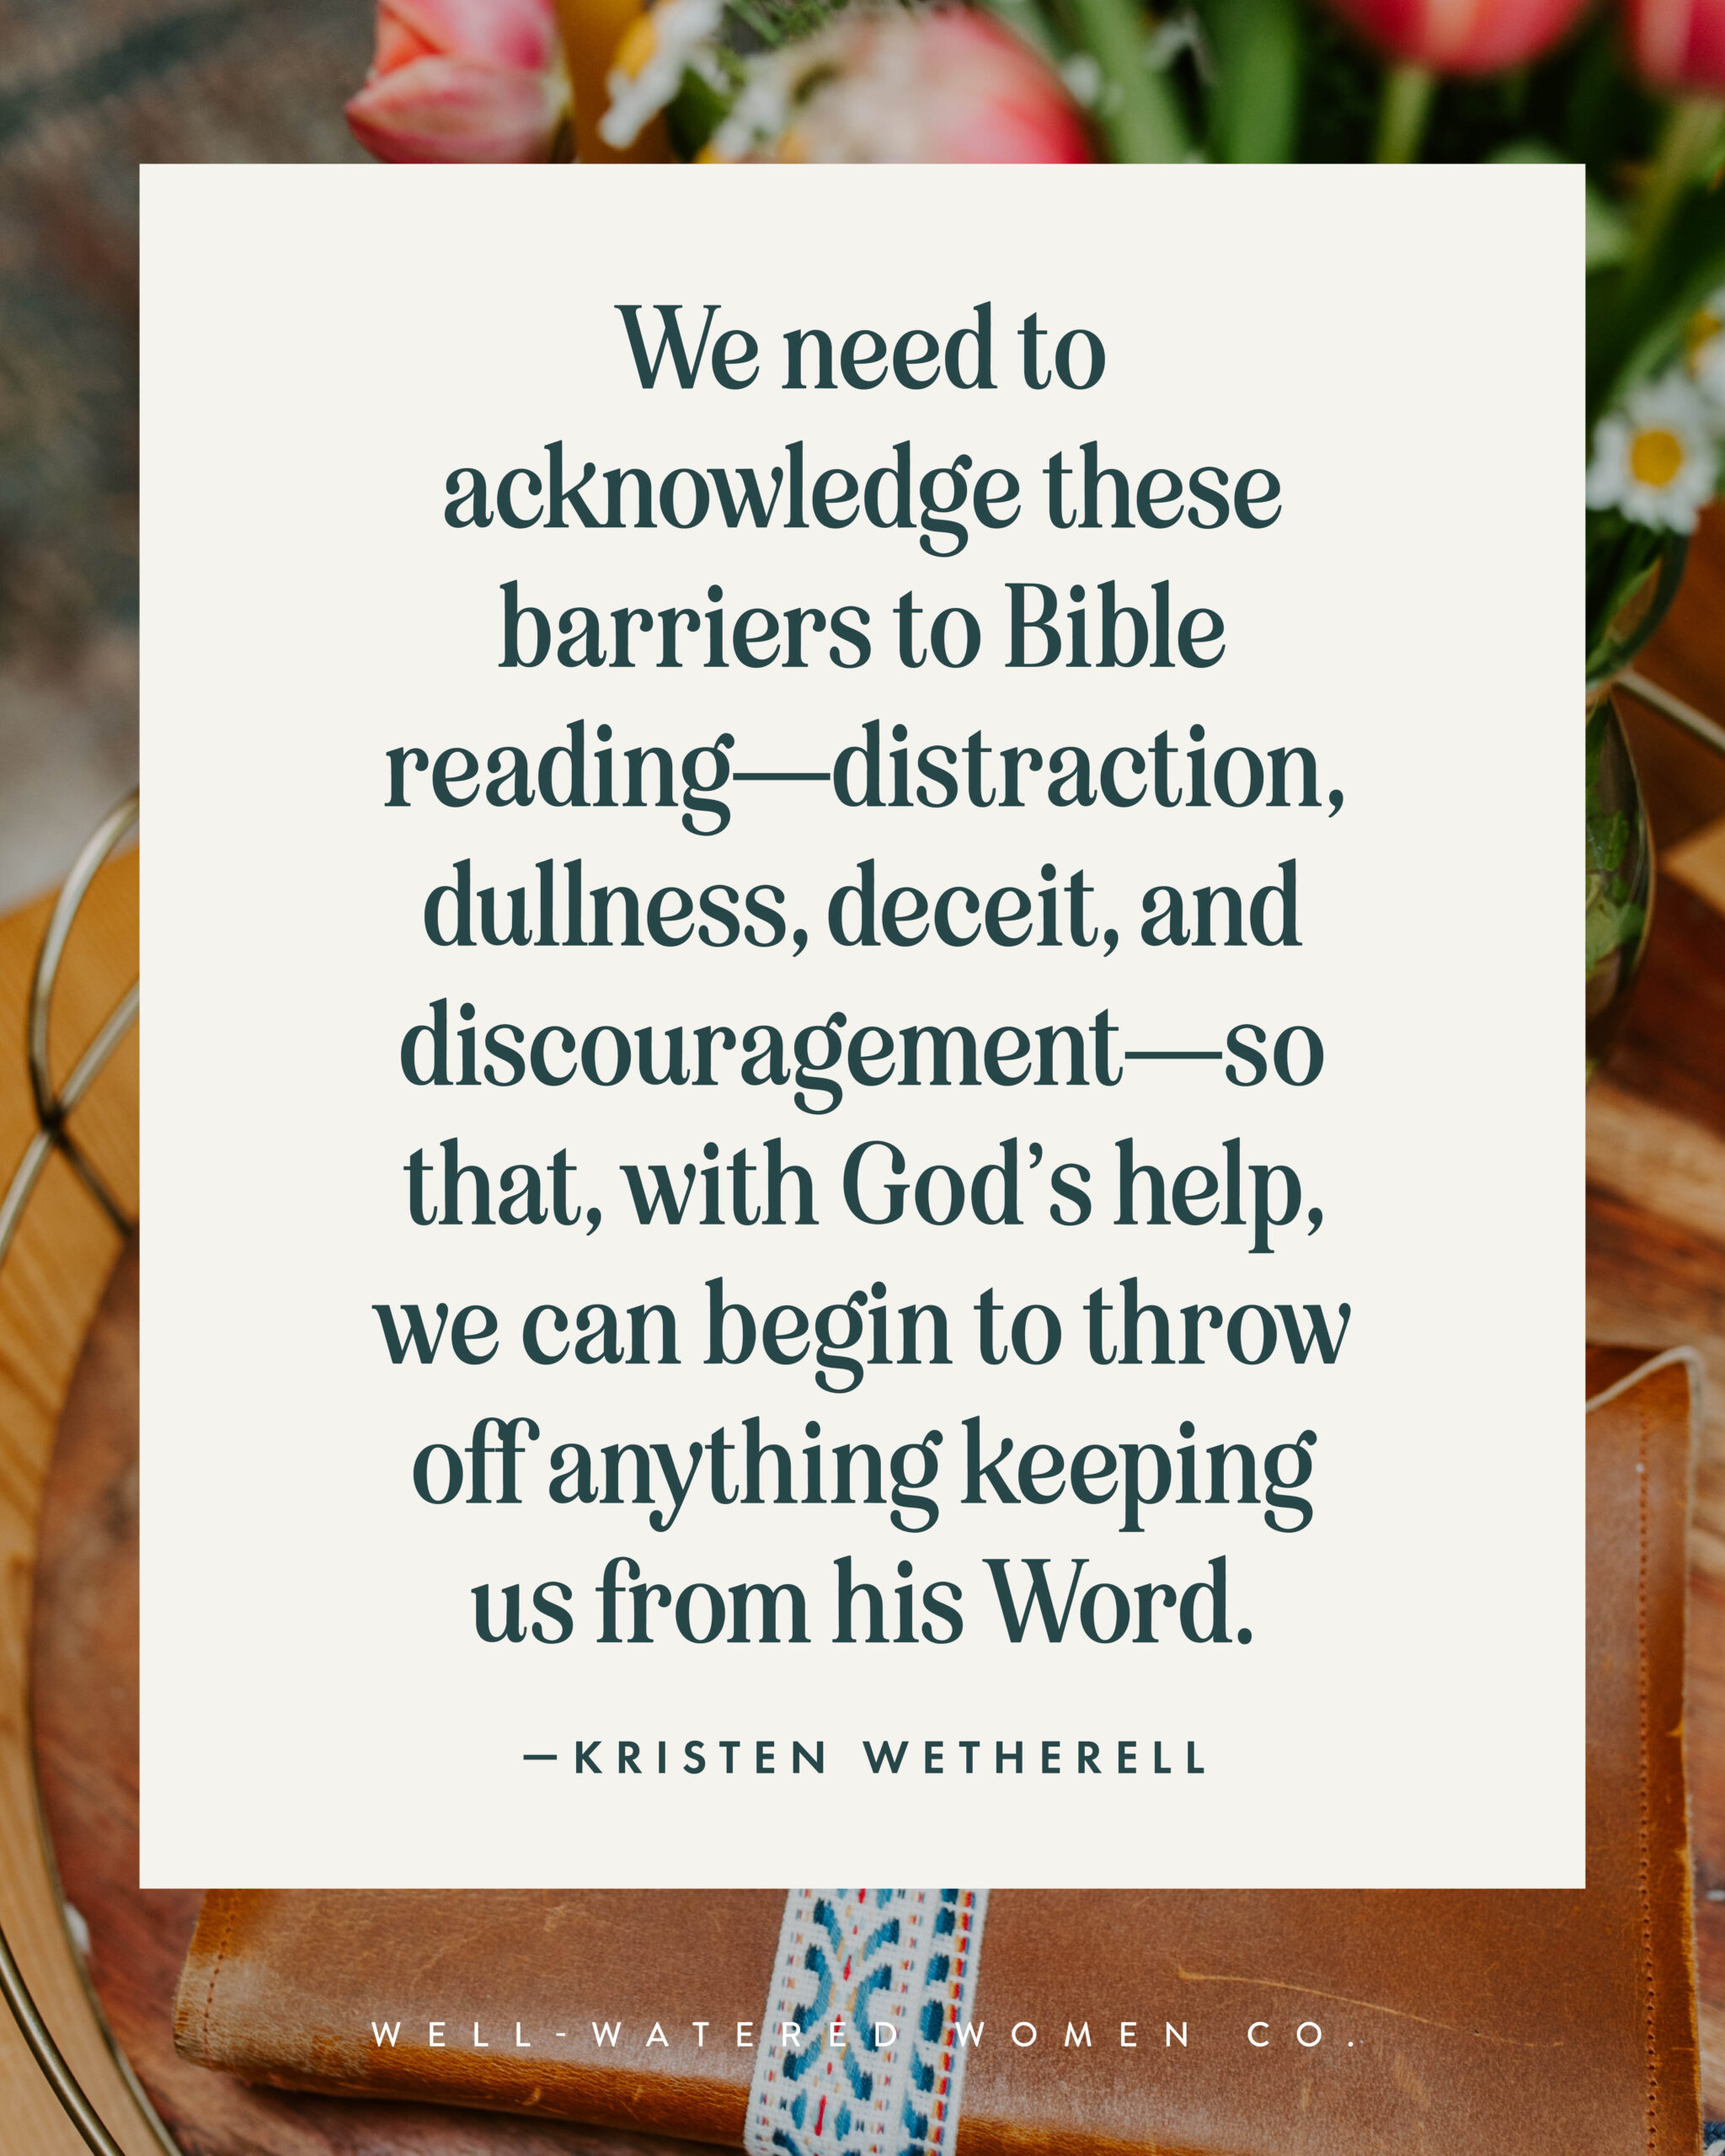 Why Don't I Read My Bible? - an article from Well-Watered Women - quote